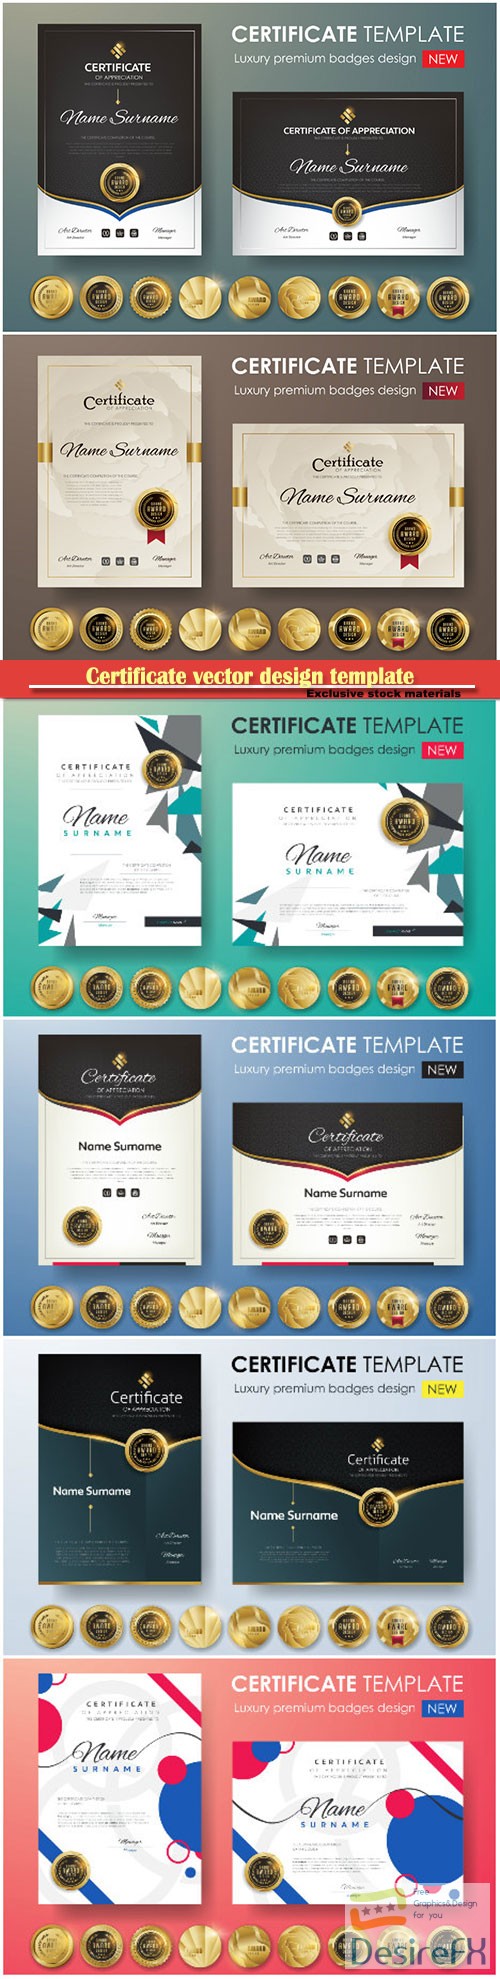 Certificate and vector diploma design template # 61